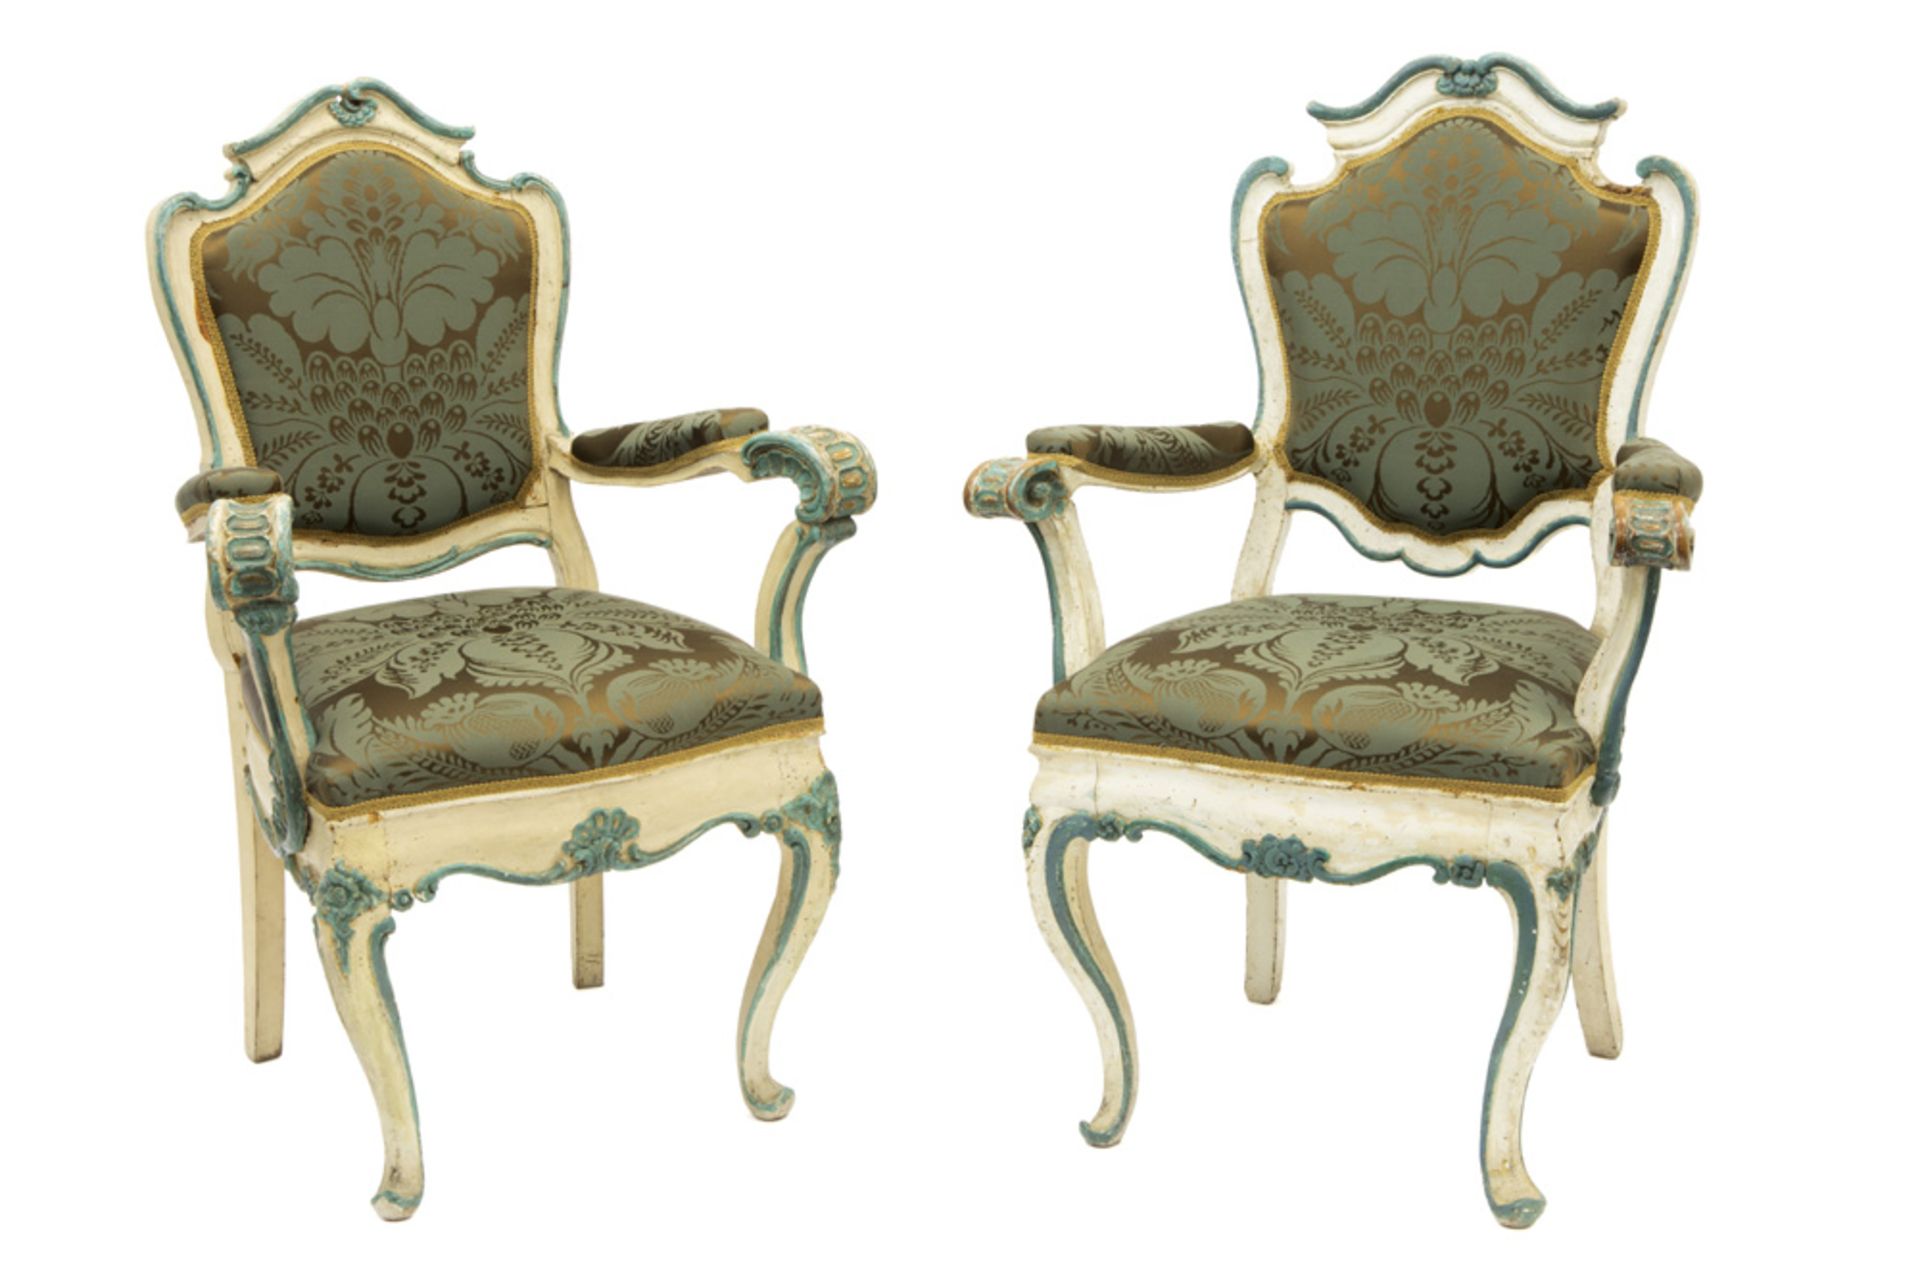 pair of 18th Cent. Venetian armchairs in sculpted and polychromed wood ||ITALIË - 18° EEUW paar